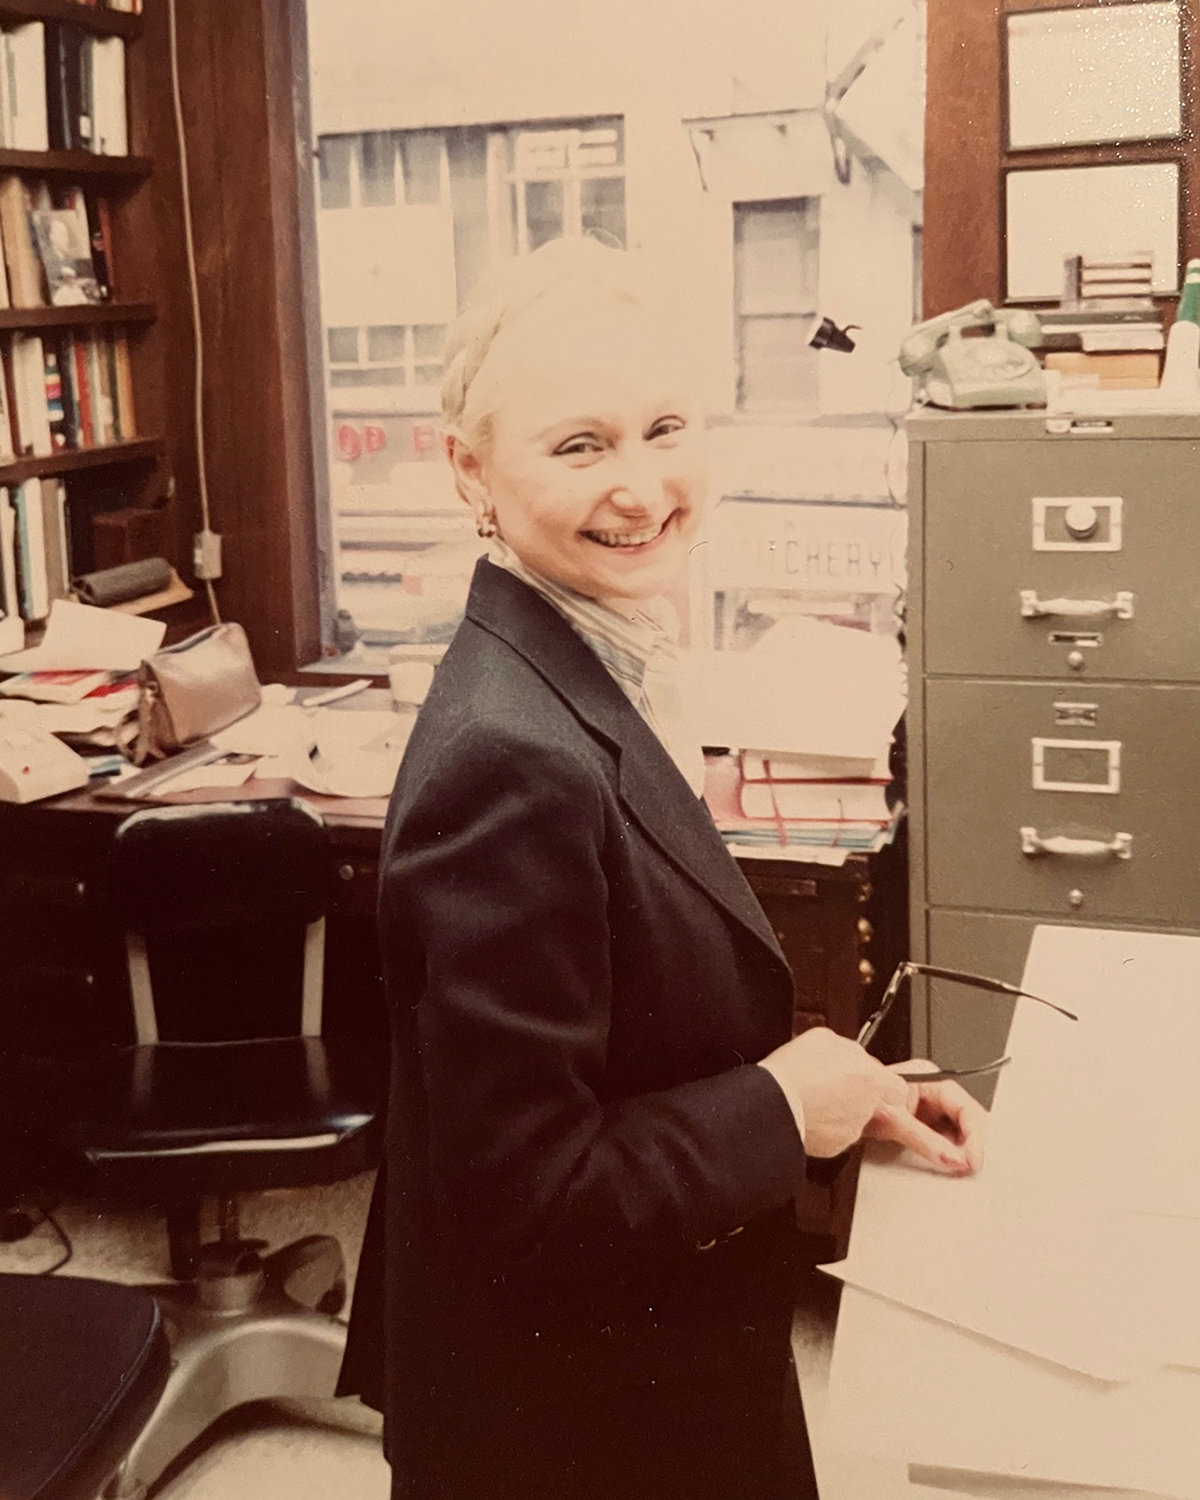 Working as a questioned documents expert for decades, Pearl Tytell exposed all kinds of fraud. Now her brain is serving a different purpose in the Einstein College of Medicine’s aging study, which seeks to better understand diseases like dementia and Alzheimer’s.